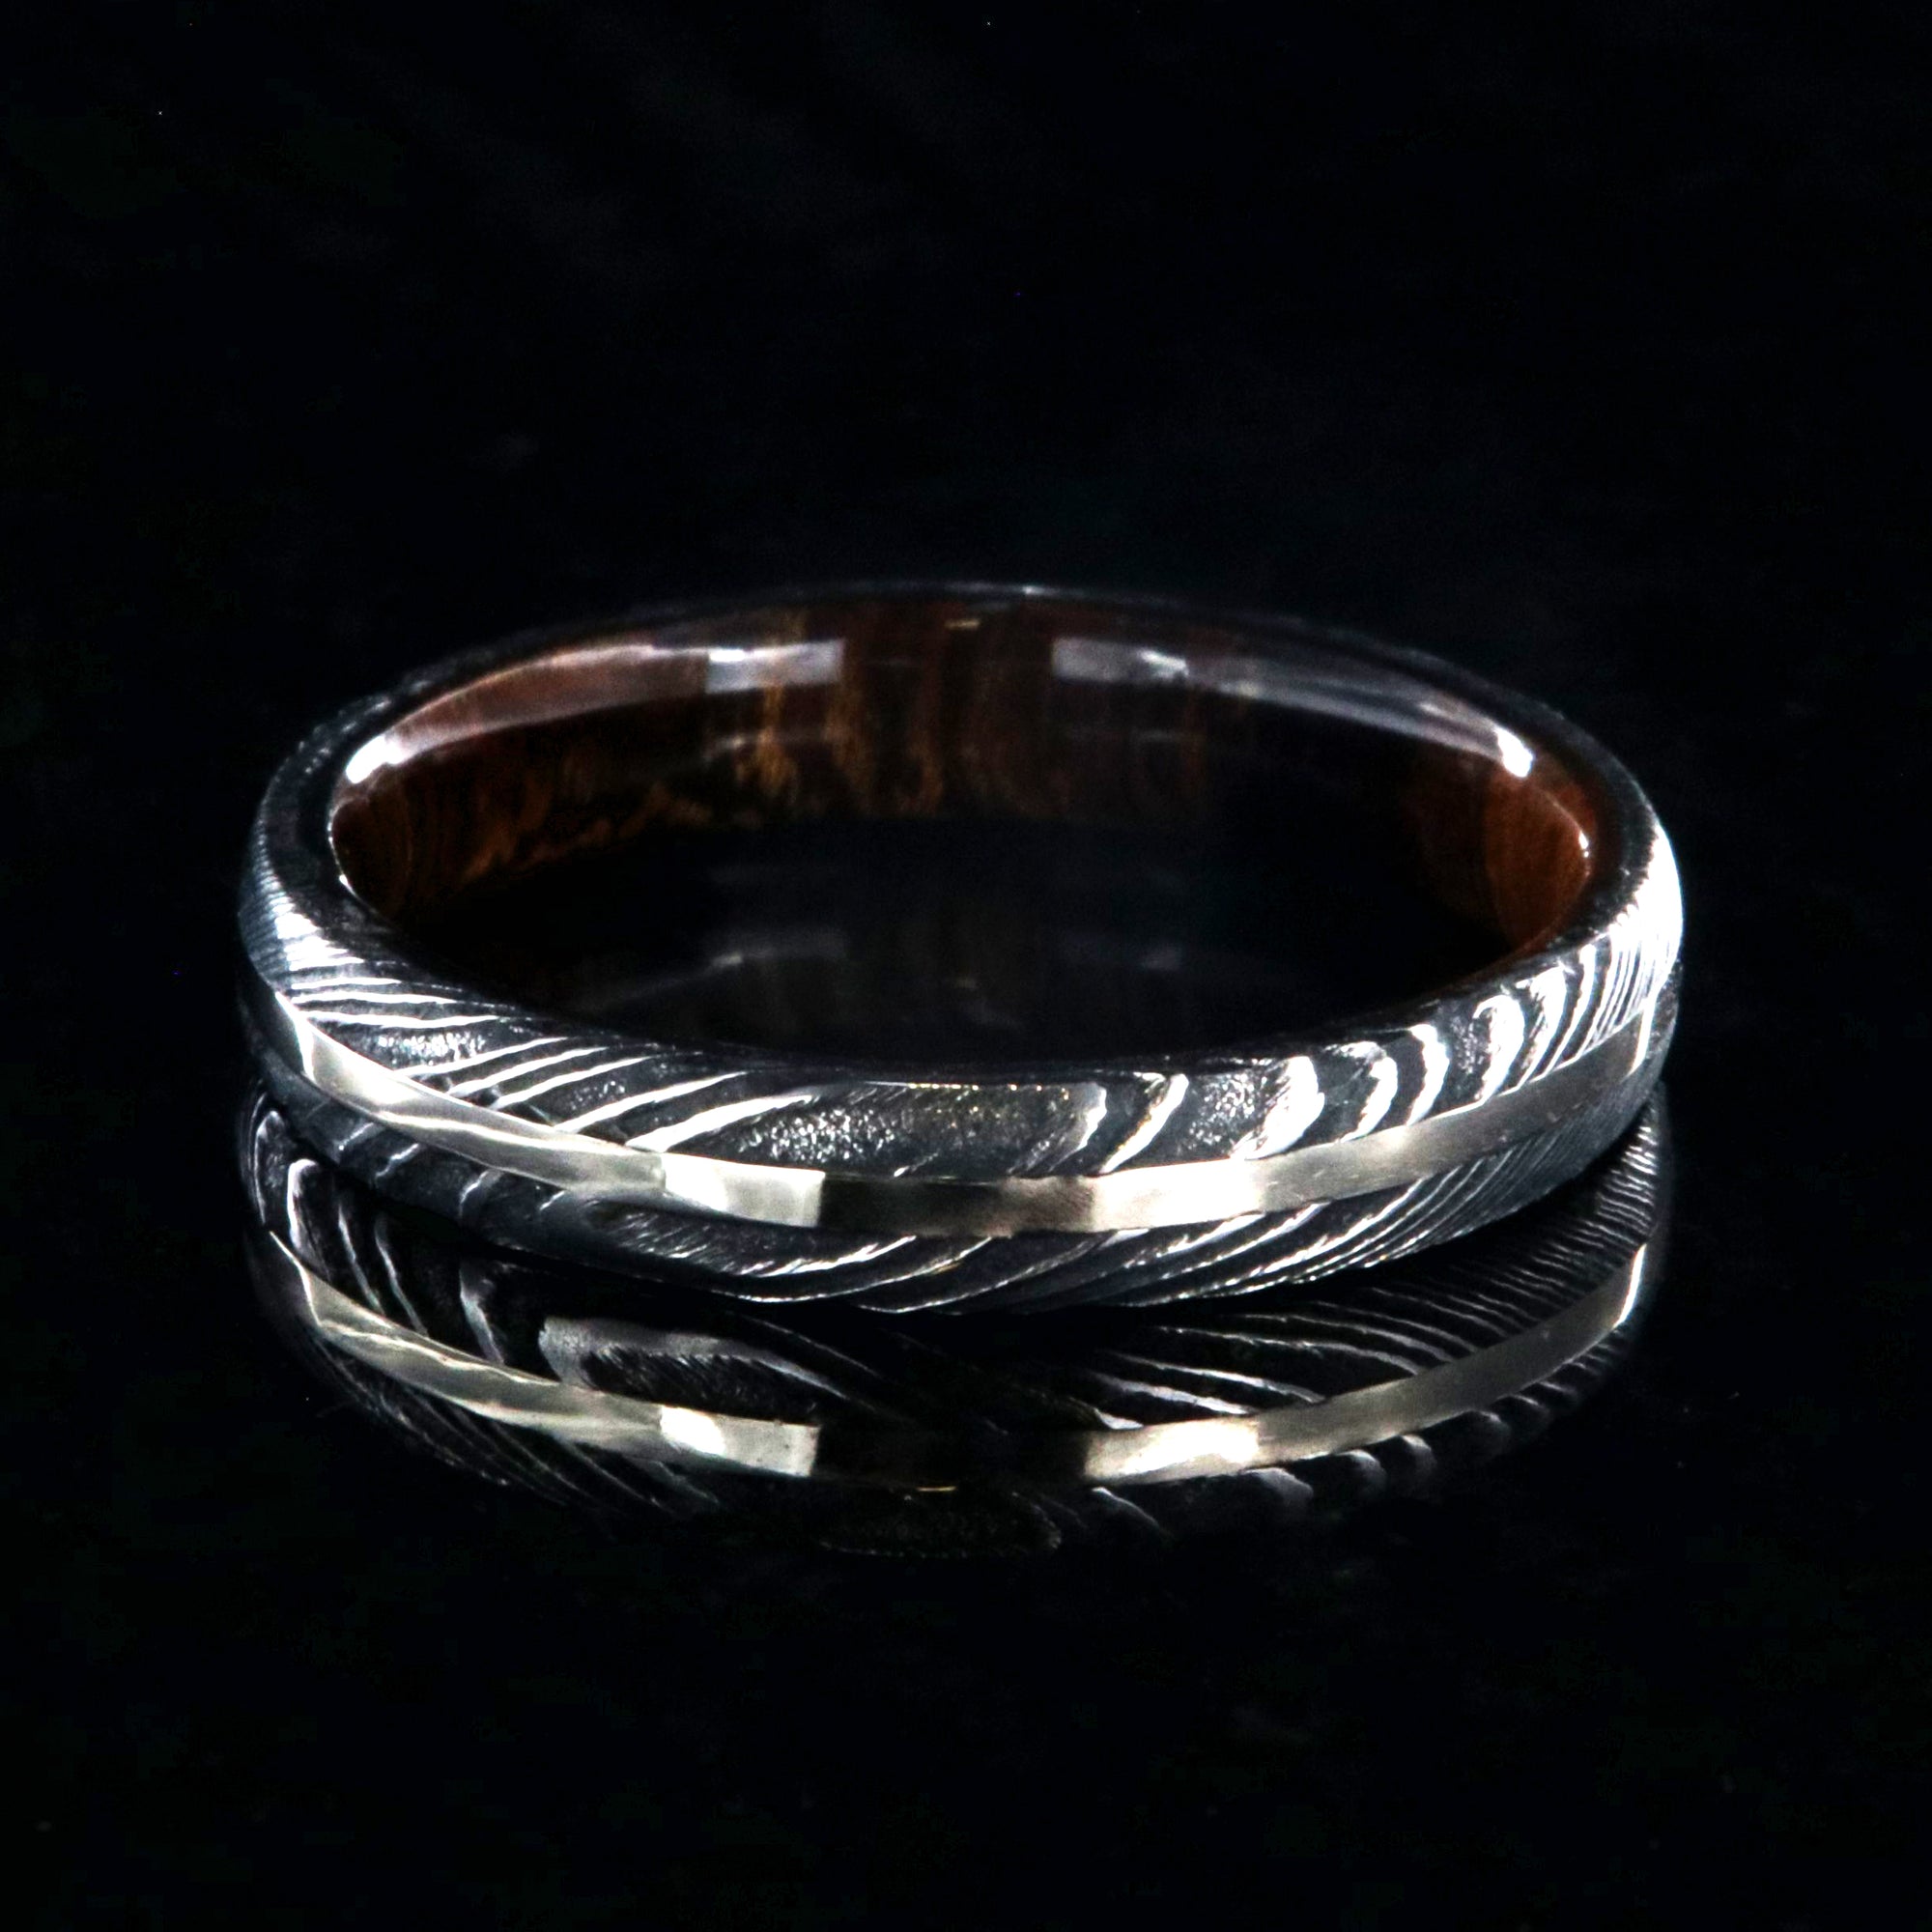 4mm wide black Damascus steel wedding band with a white gold inlay, Arizona ironwood sleeve, and a rounded profile